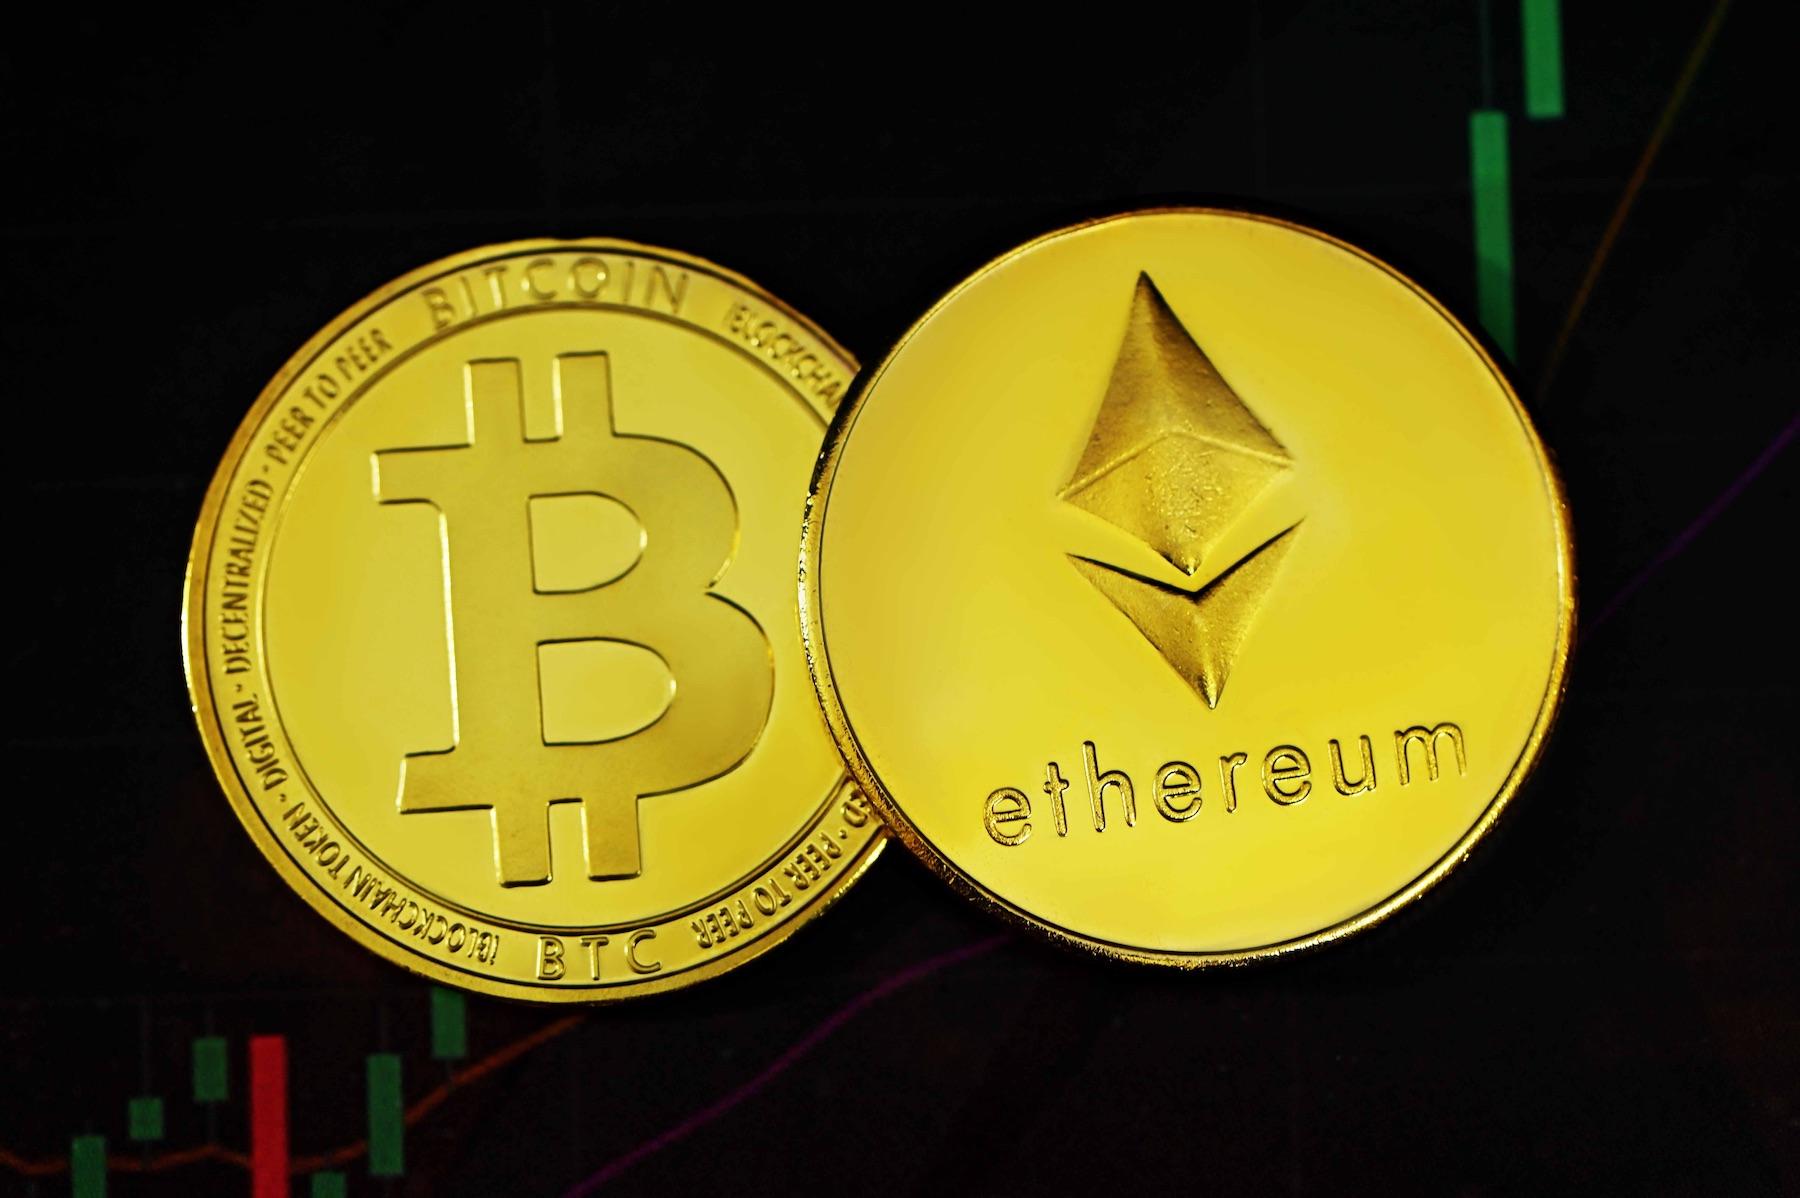 Bitcoin and ethereum